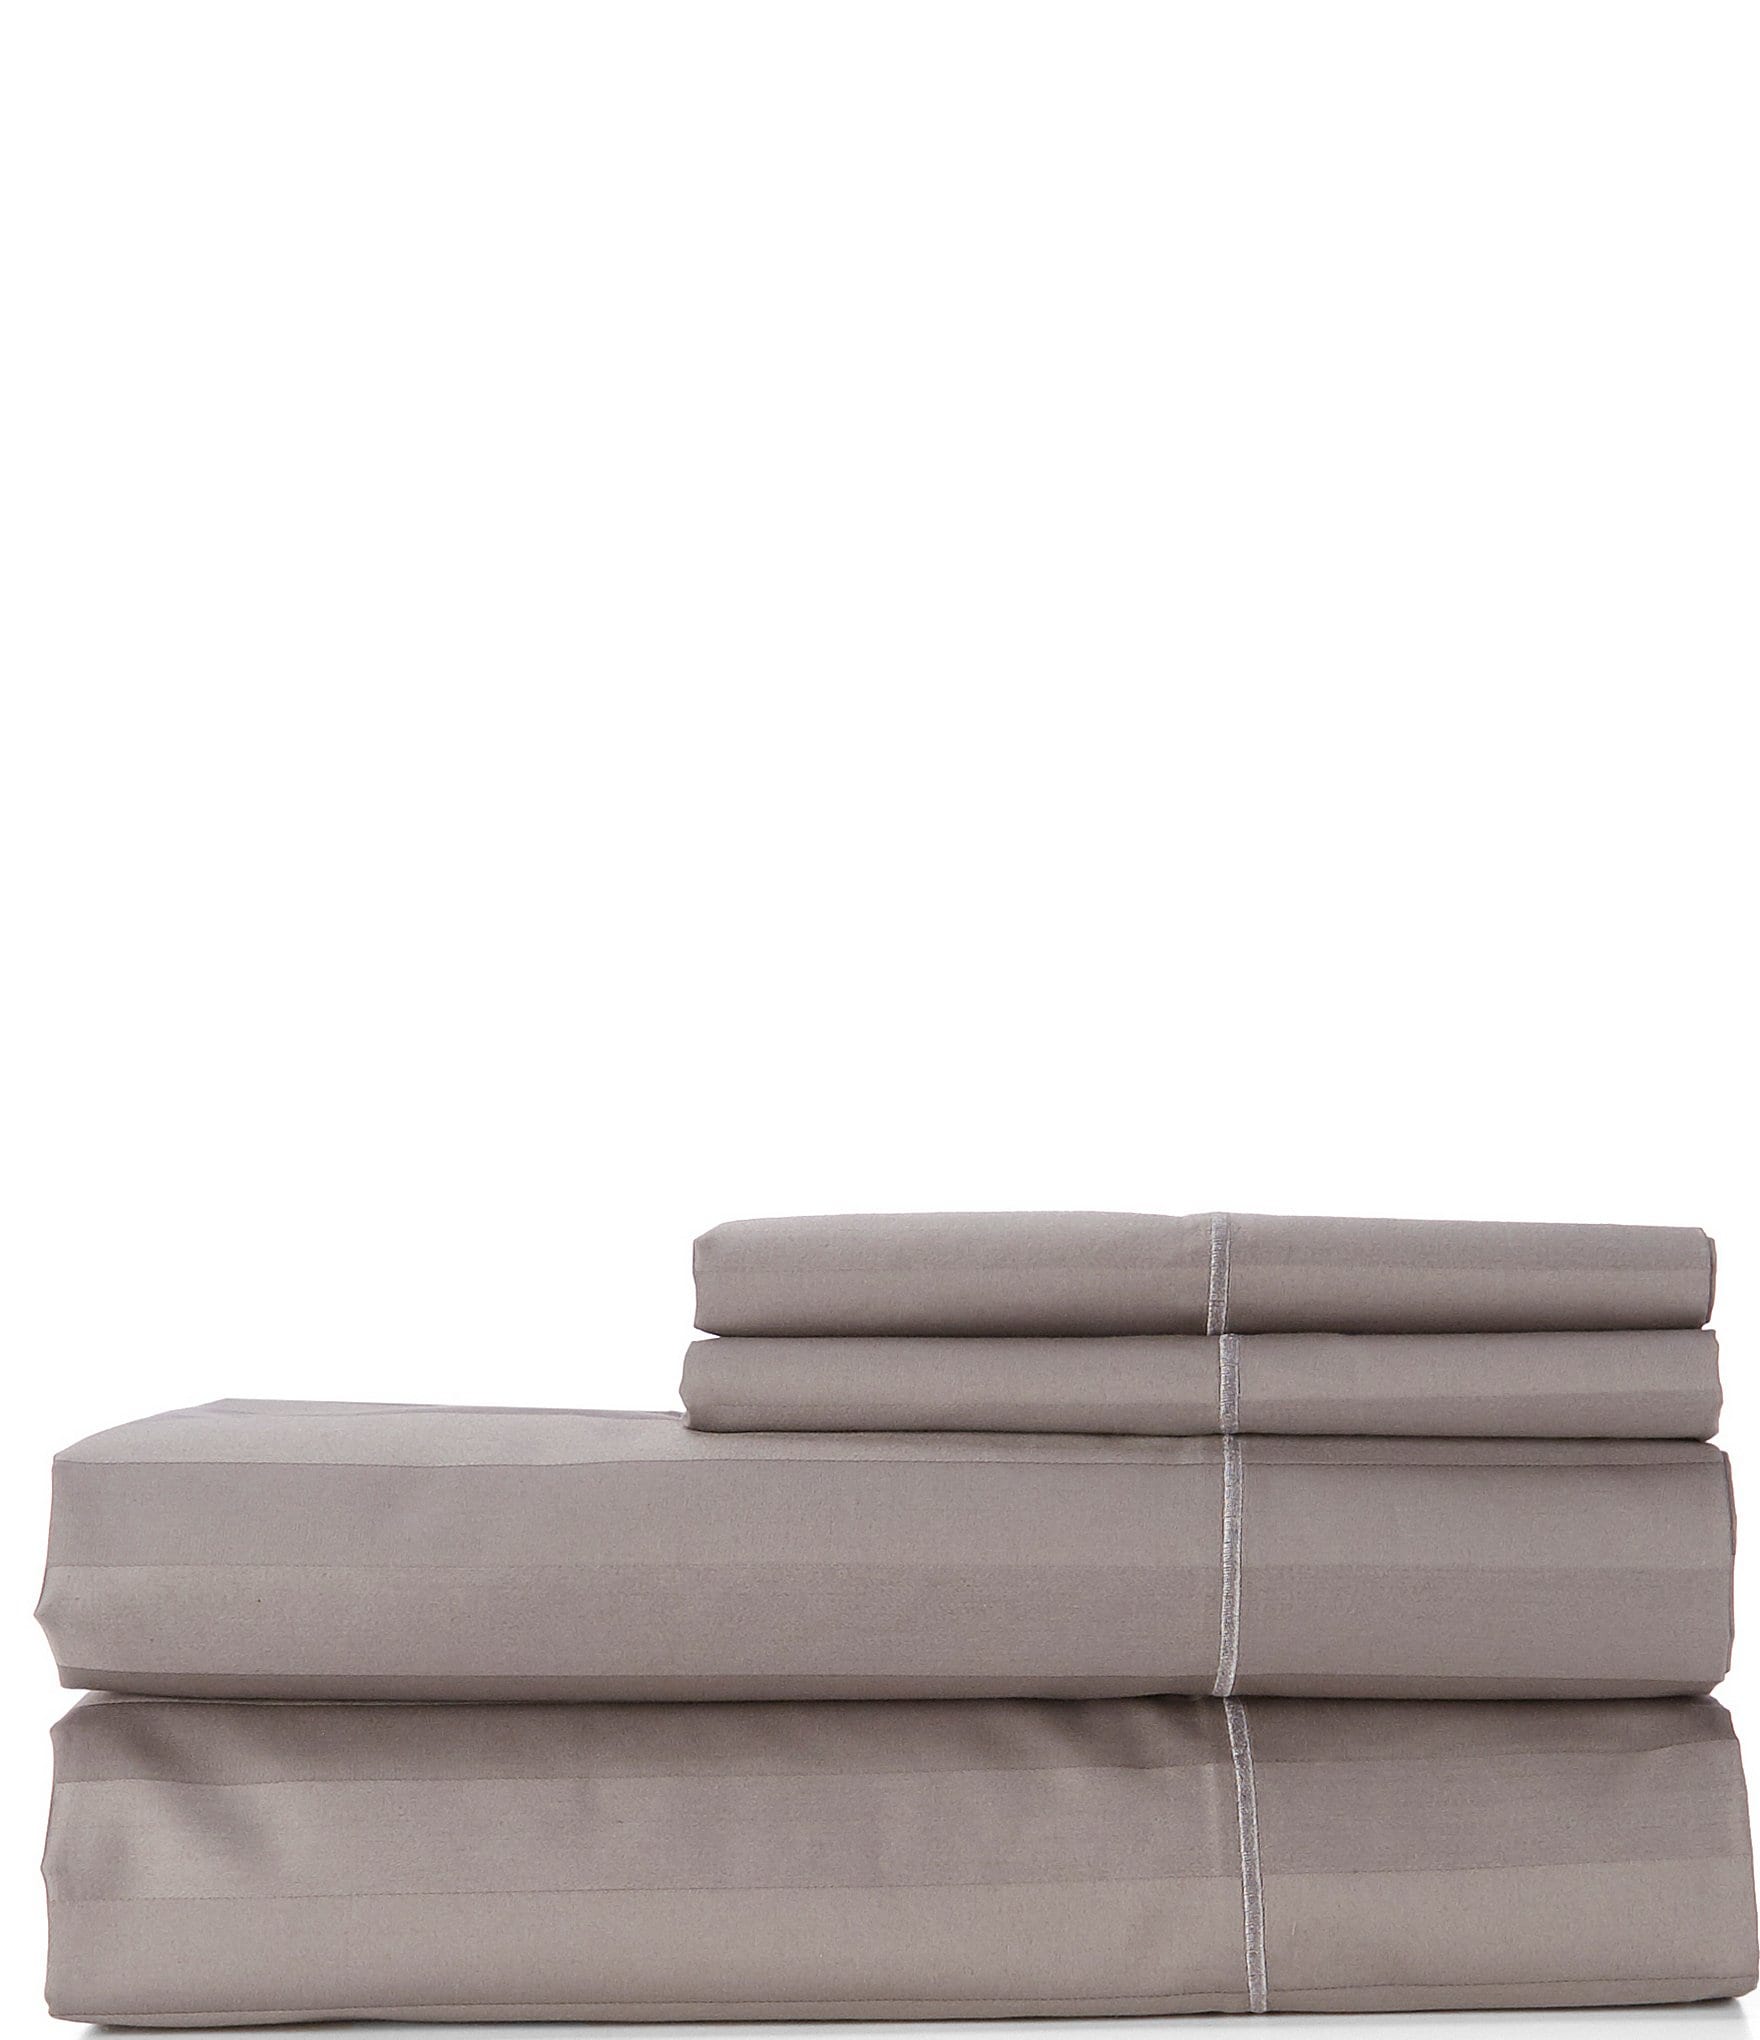 Luxury Hotel 800-Thread-Count Sheet Set Infinity Cotton® with